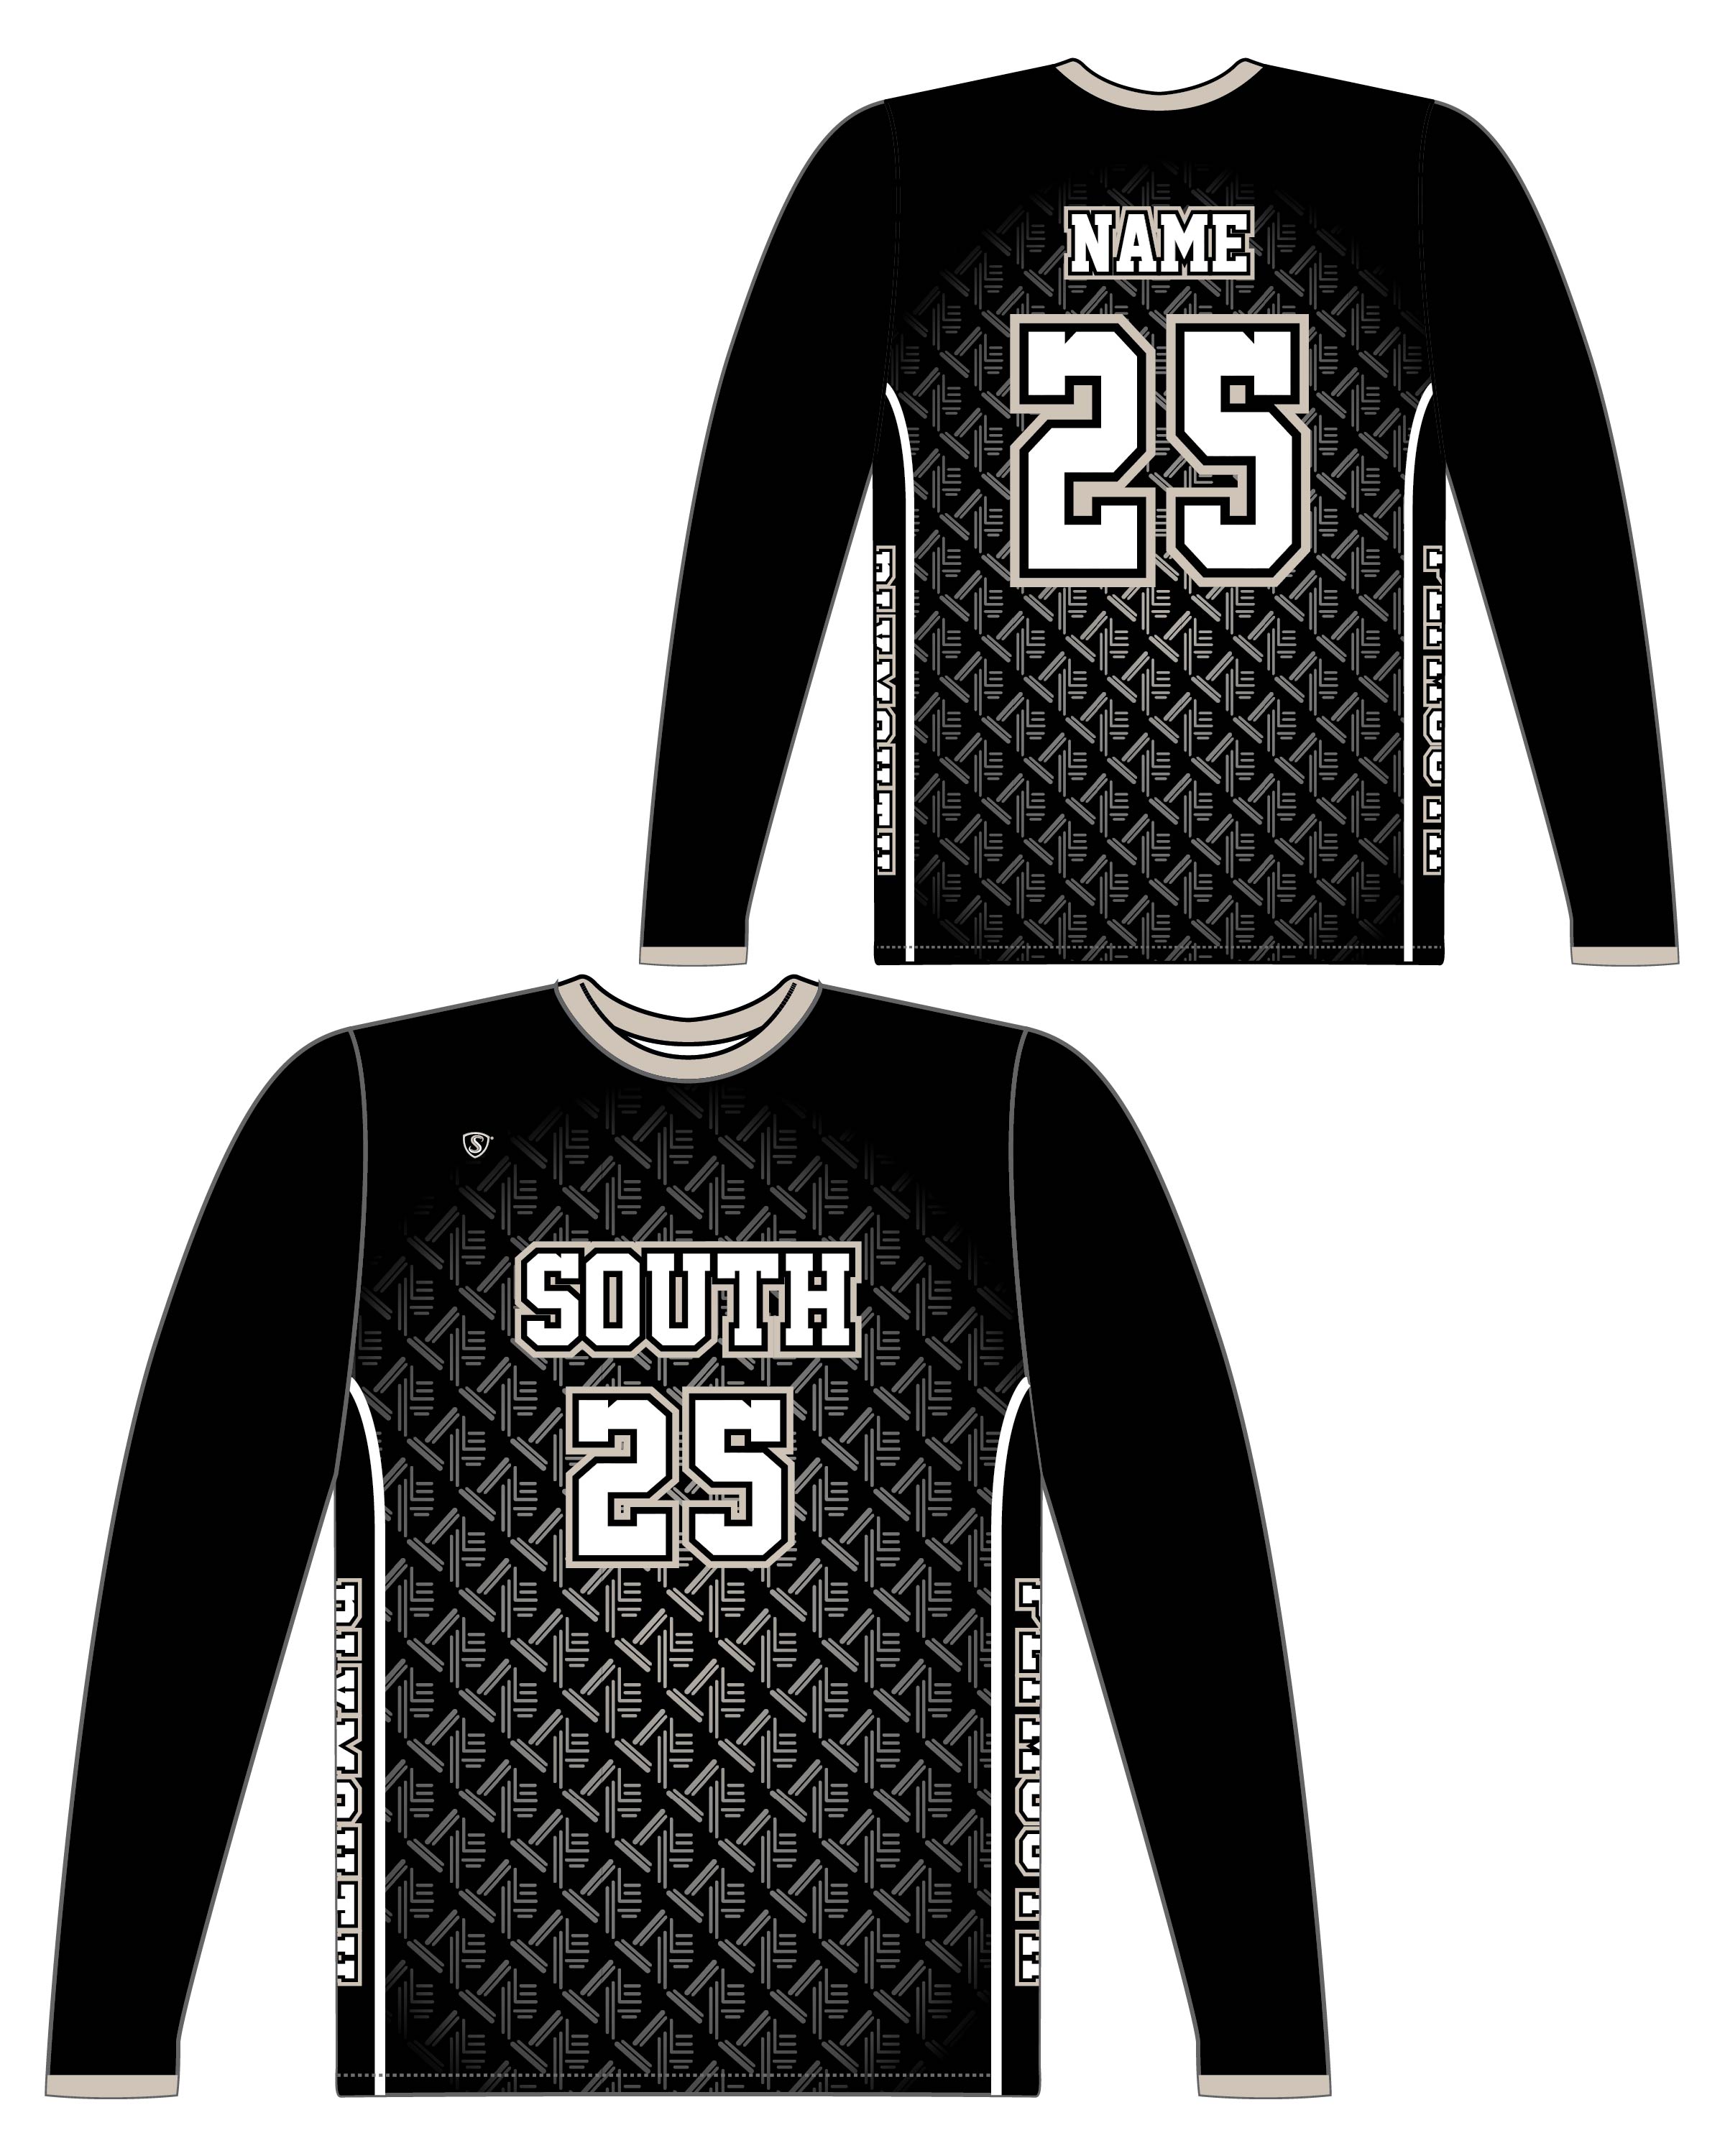 Custom Sublimated Shooter Shirt - South Plymouth 2